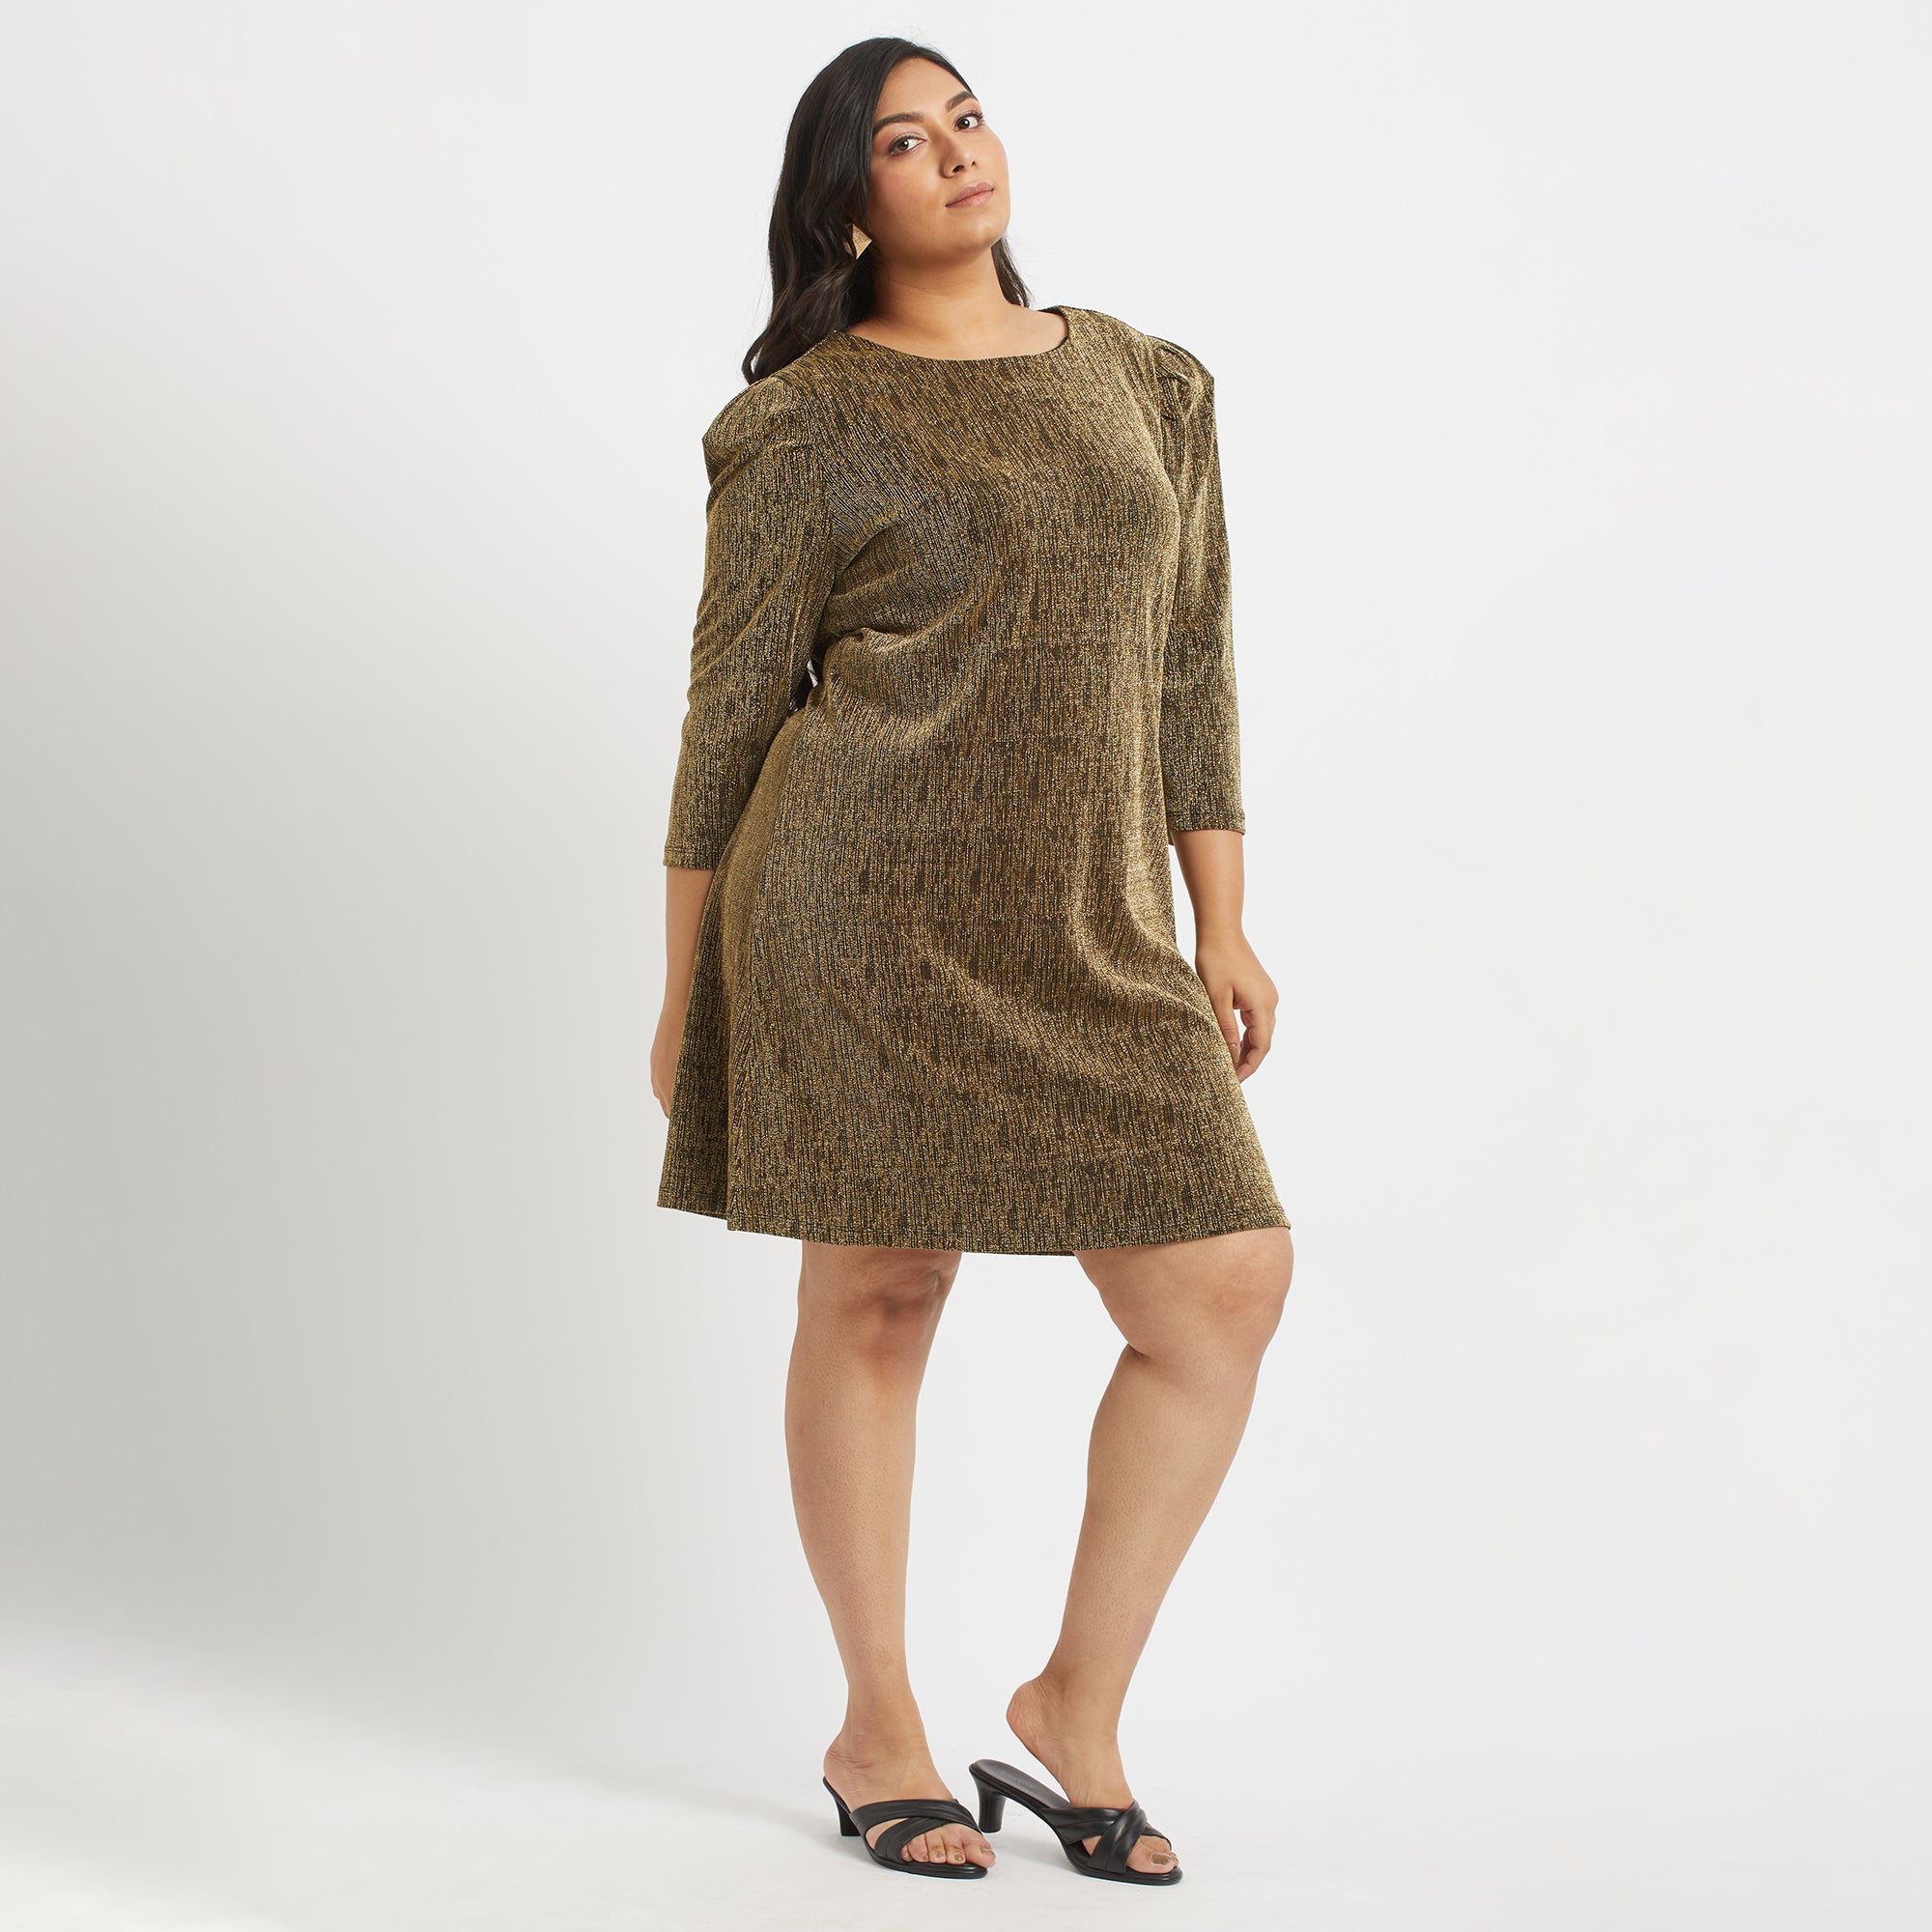 Gilded Puff Sleeve Dress For Plus Size Women